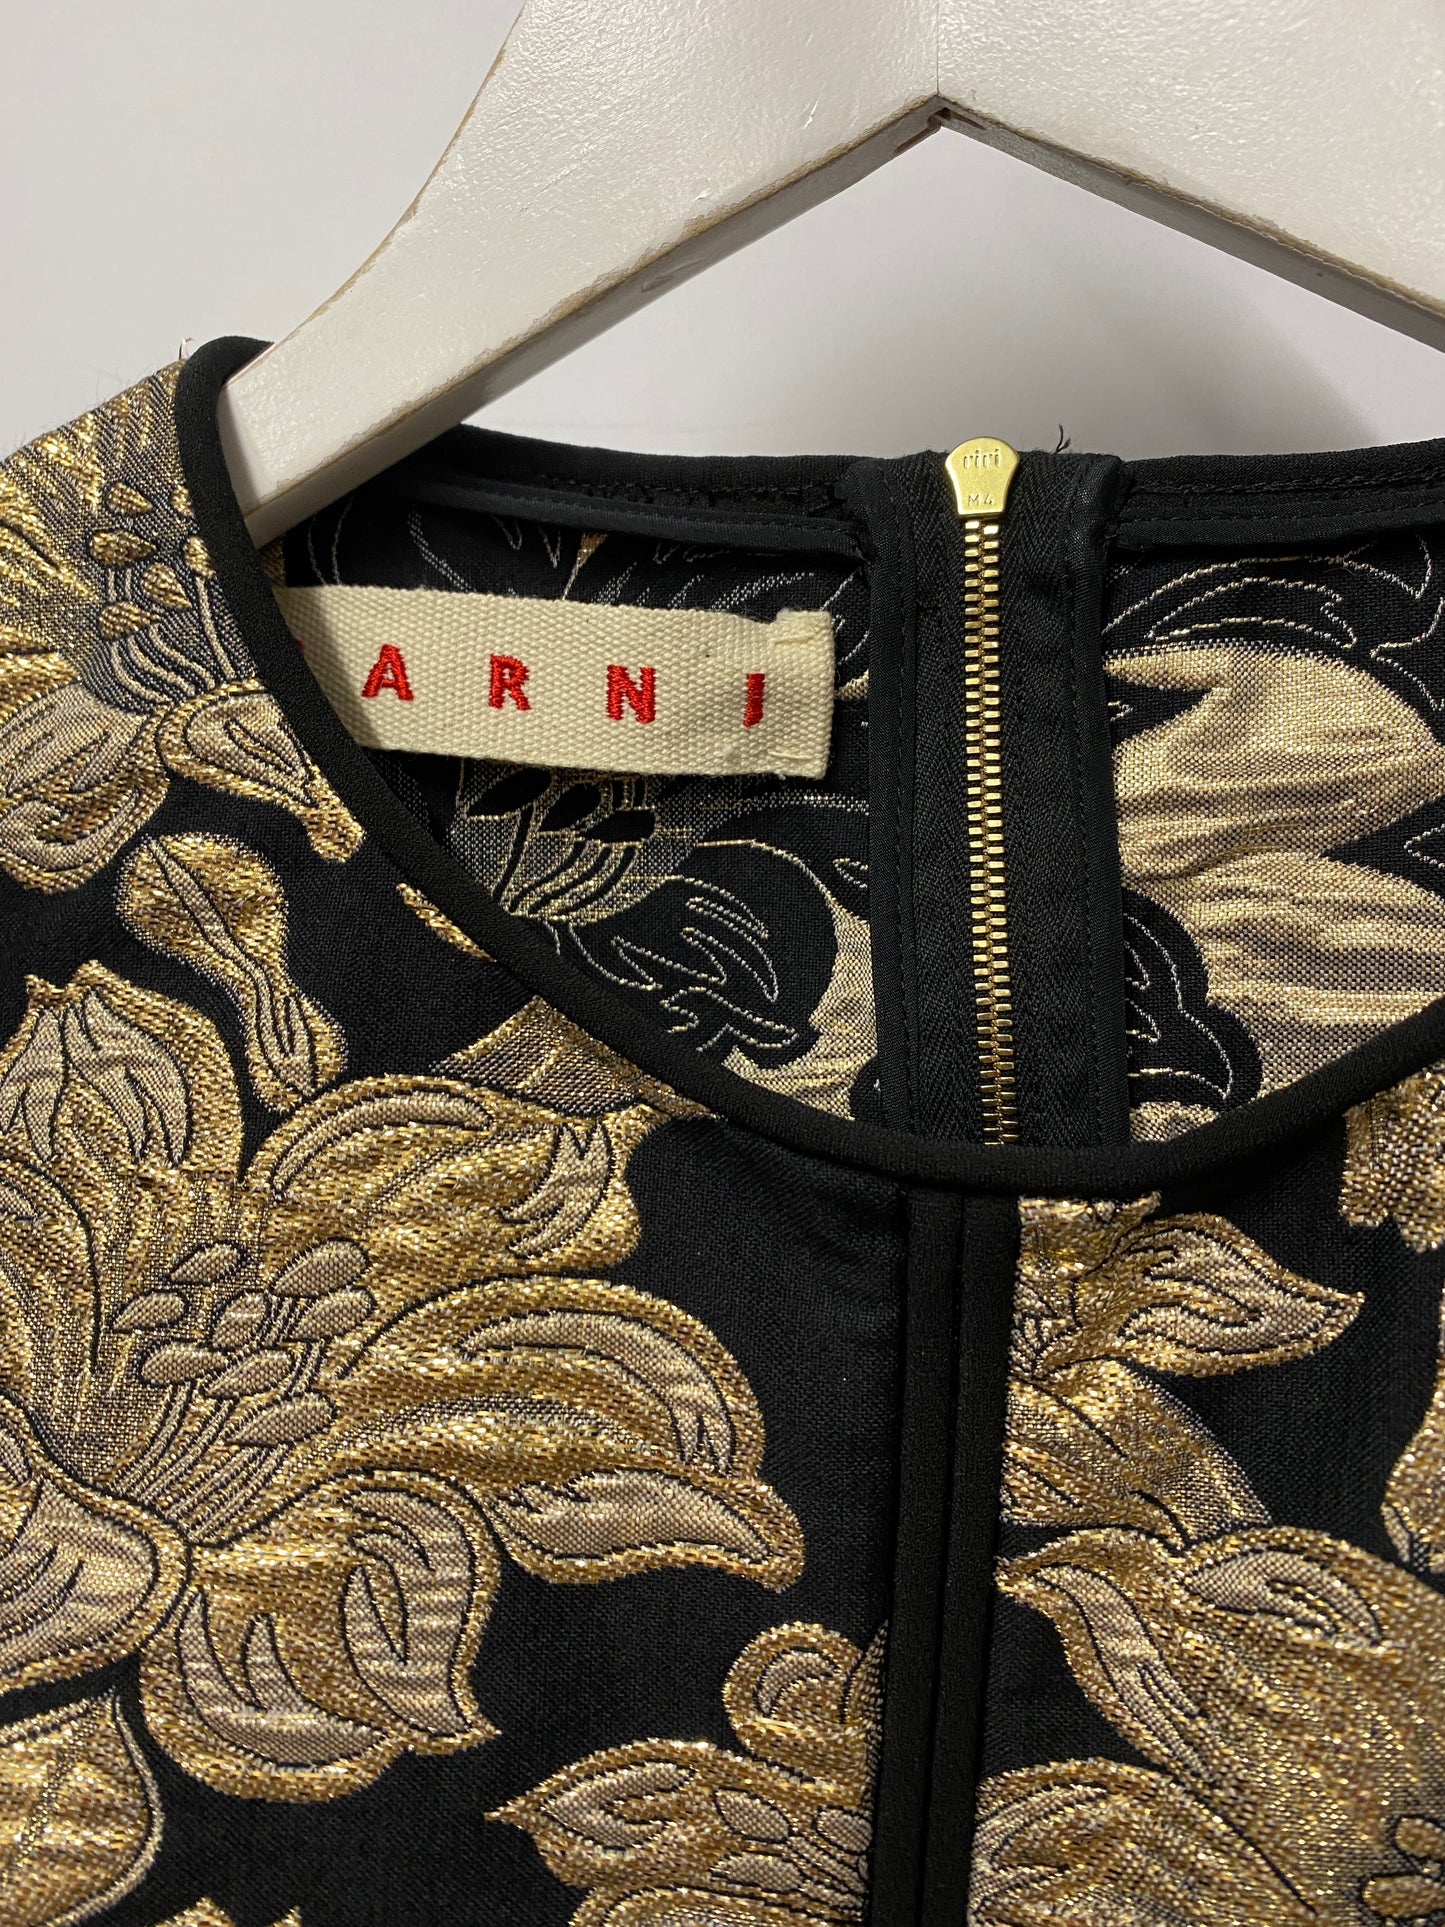 Marni Gold and Black Floral Top 12